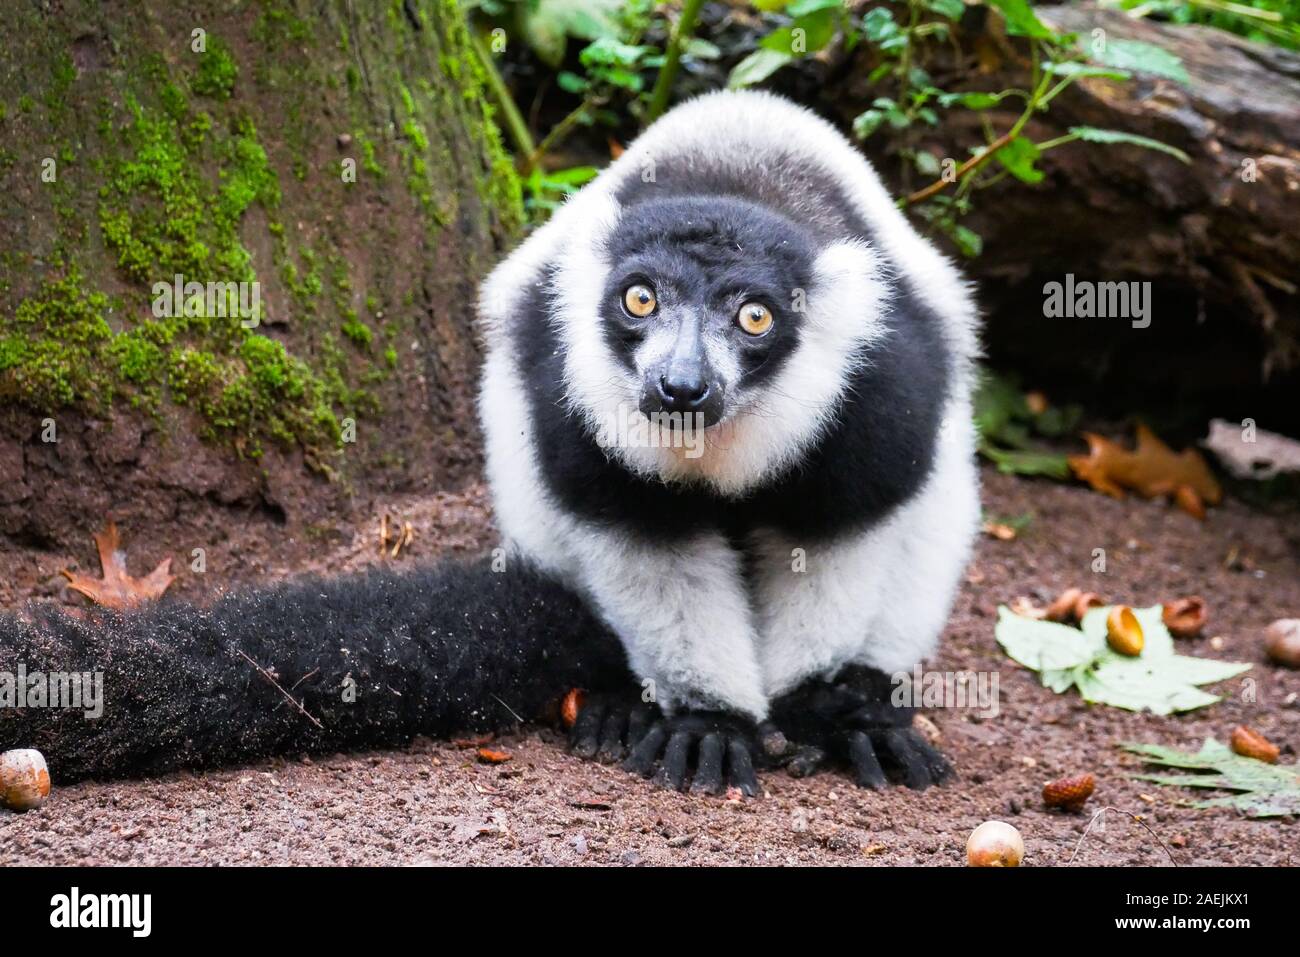 A Black-and-White Ruffed Lemur sits on the ground at the Apenheul in Apeldoorn in the Netherlands. Stock Photo